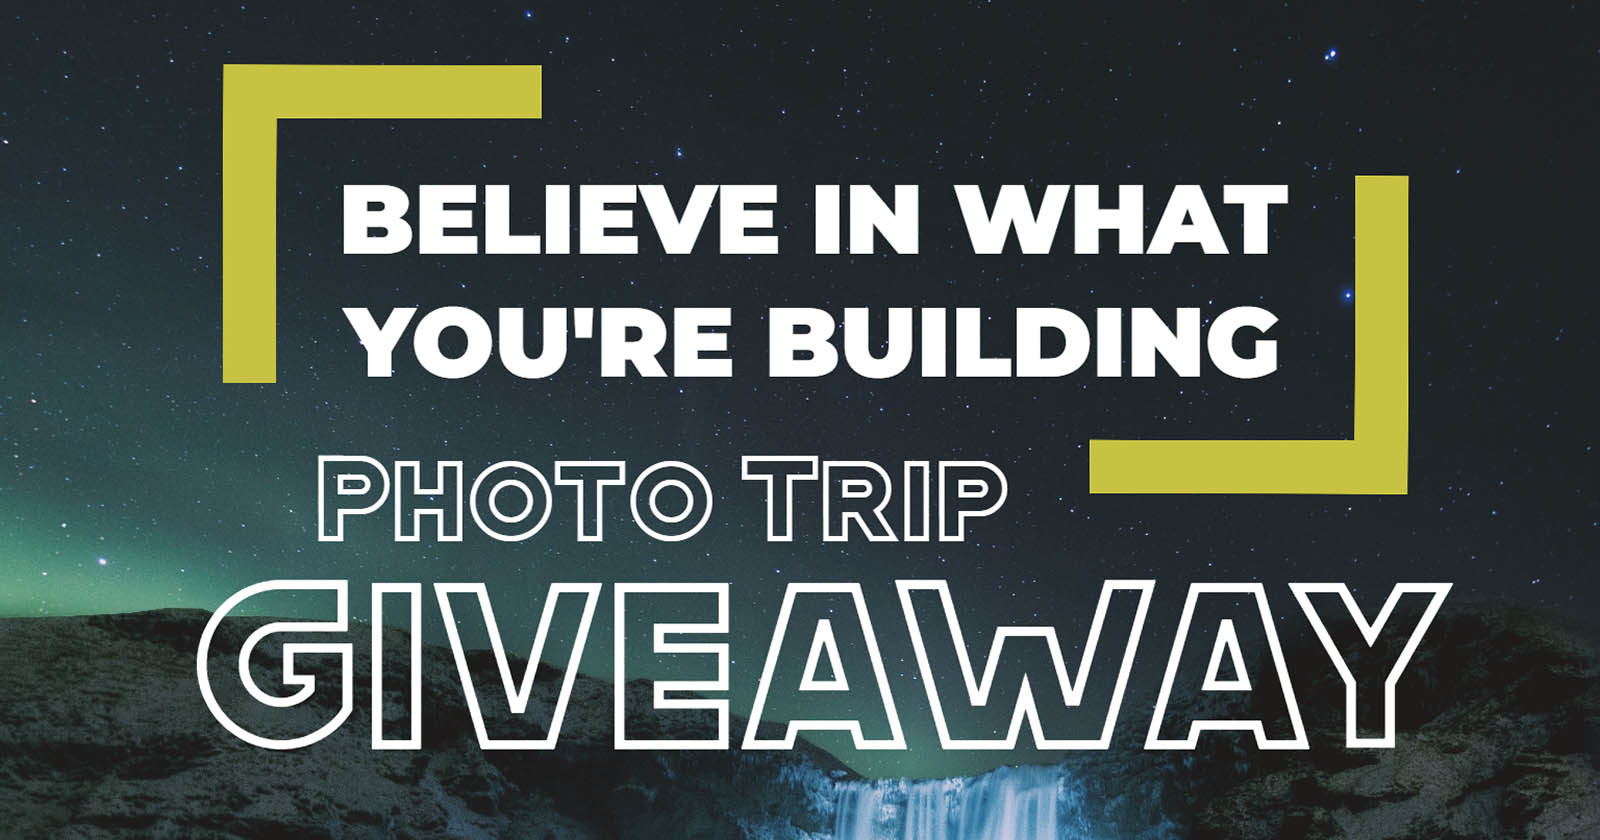 Believe in What Youre Building and Win a Photo Trip